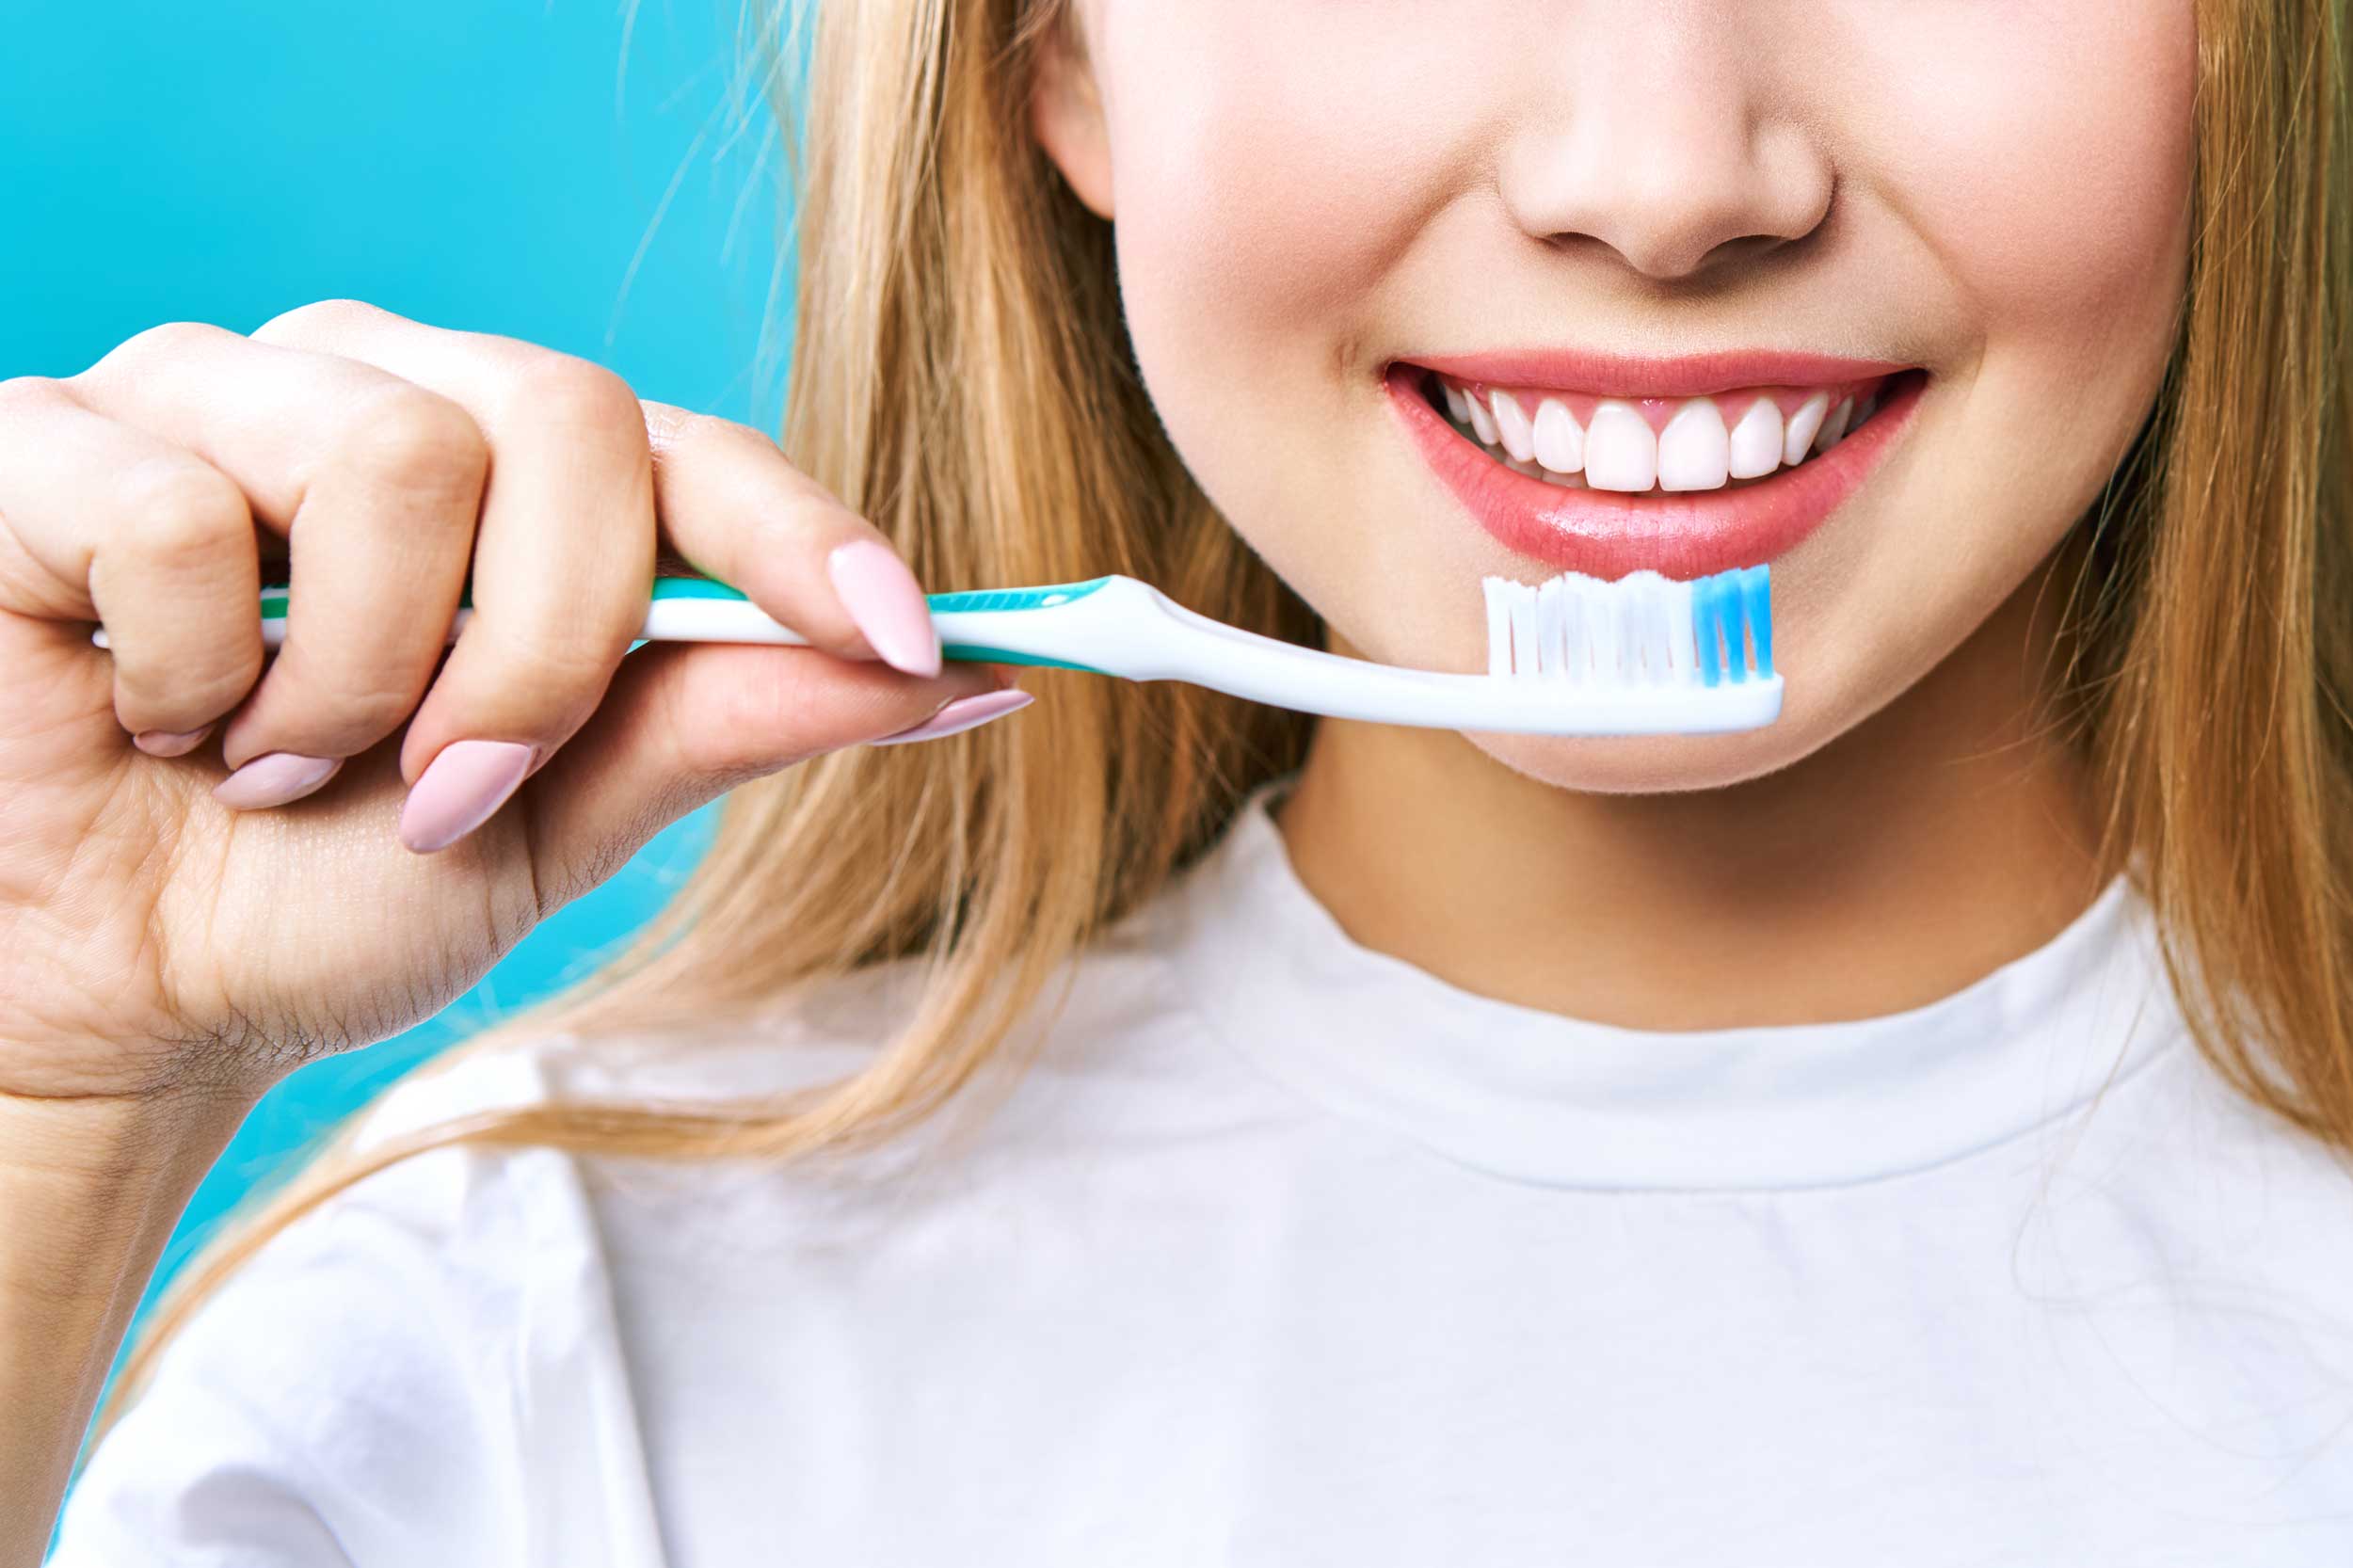 5 Tips for Daily Dental Care